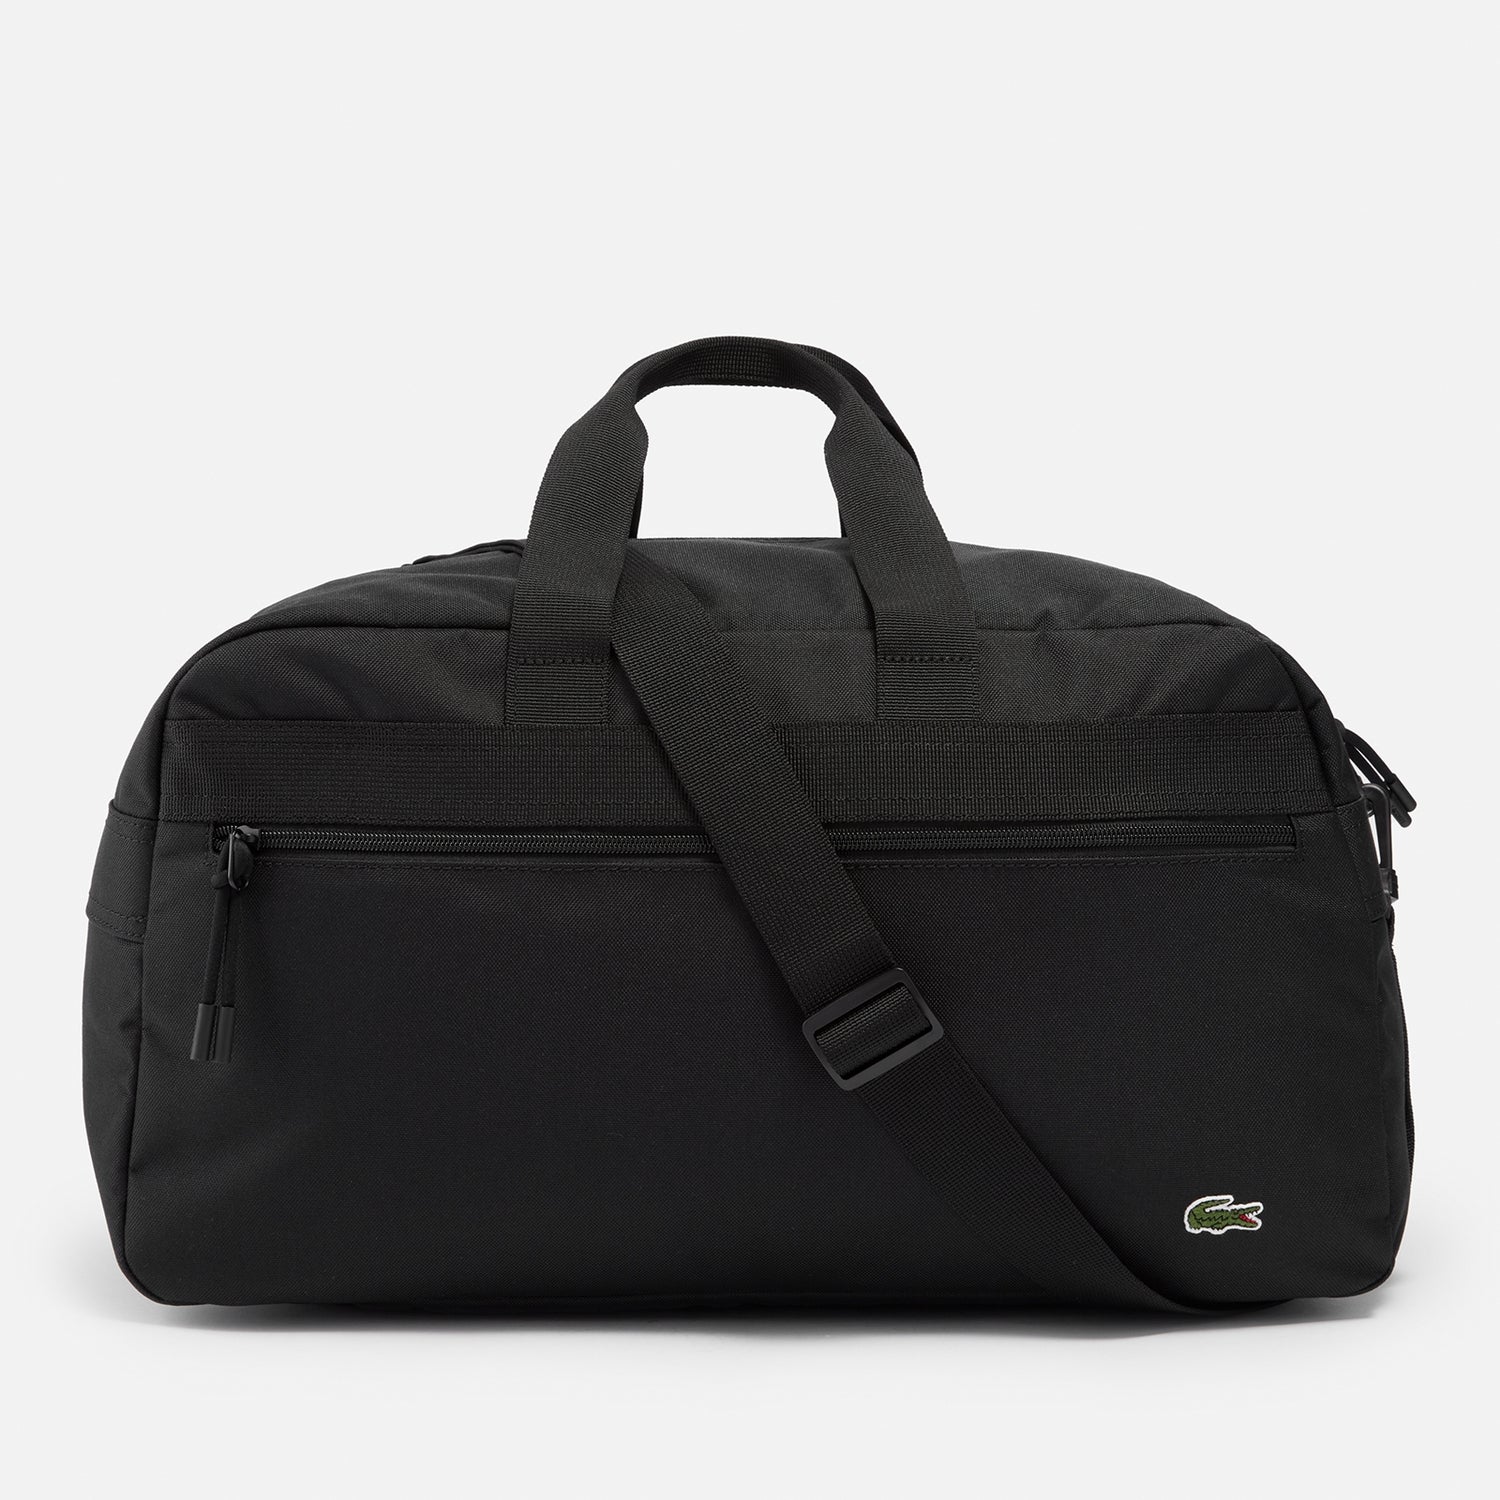 Lacoste Recycled Canvas Duffle Bag